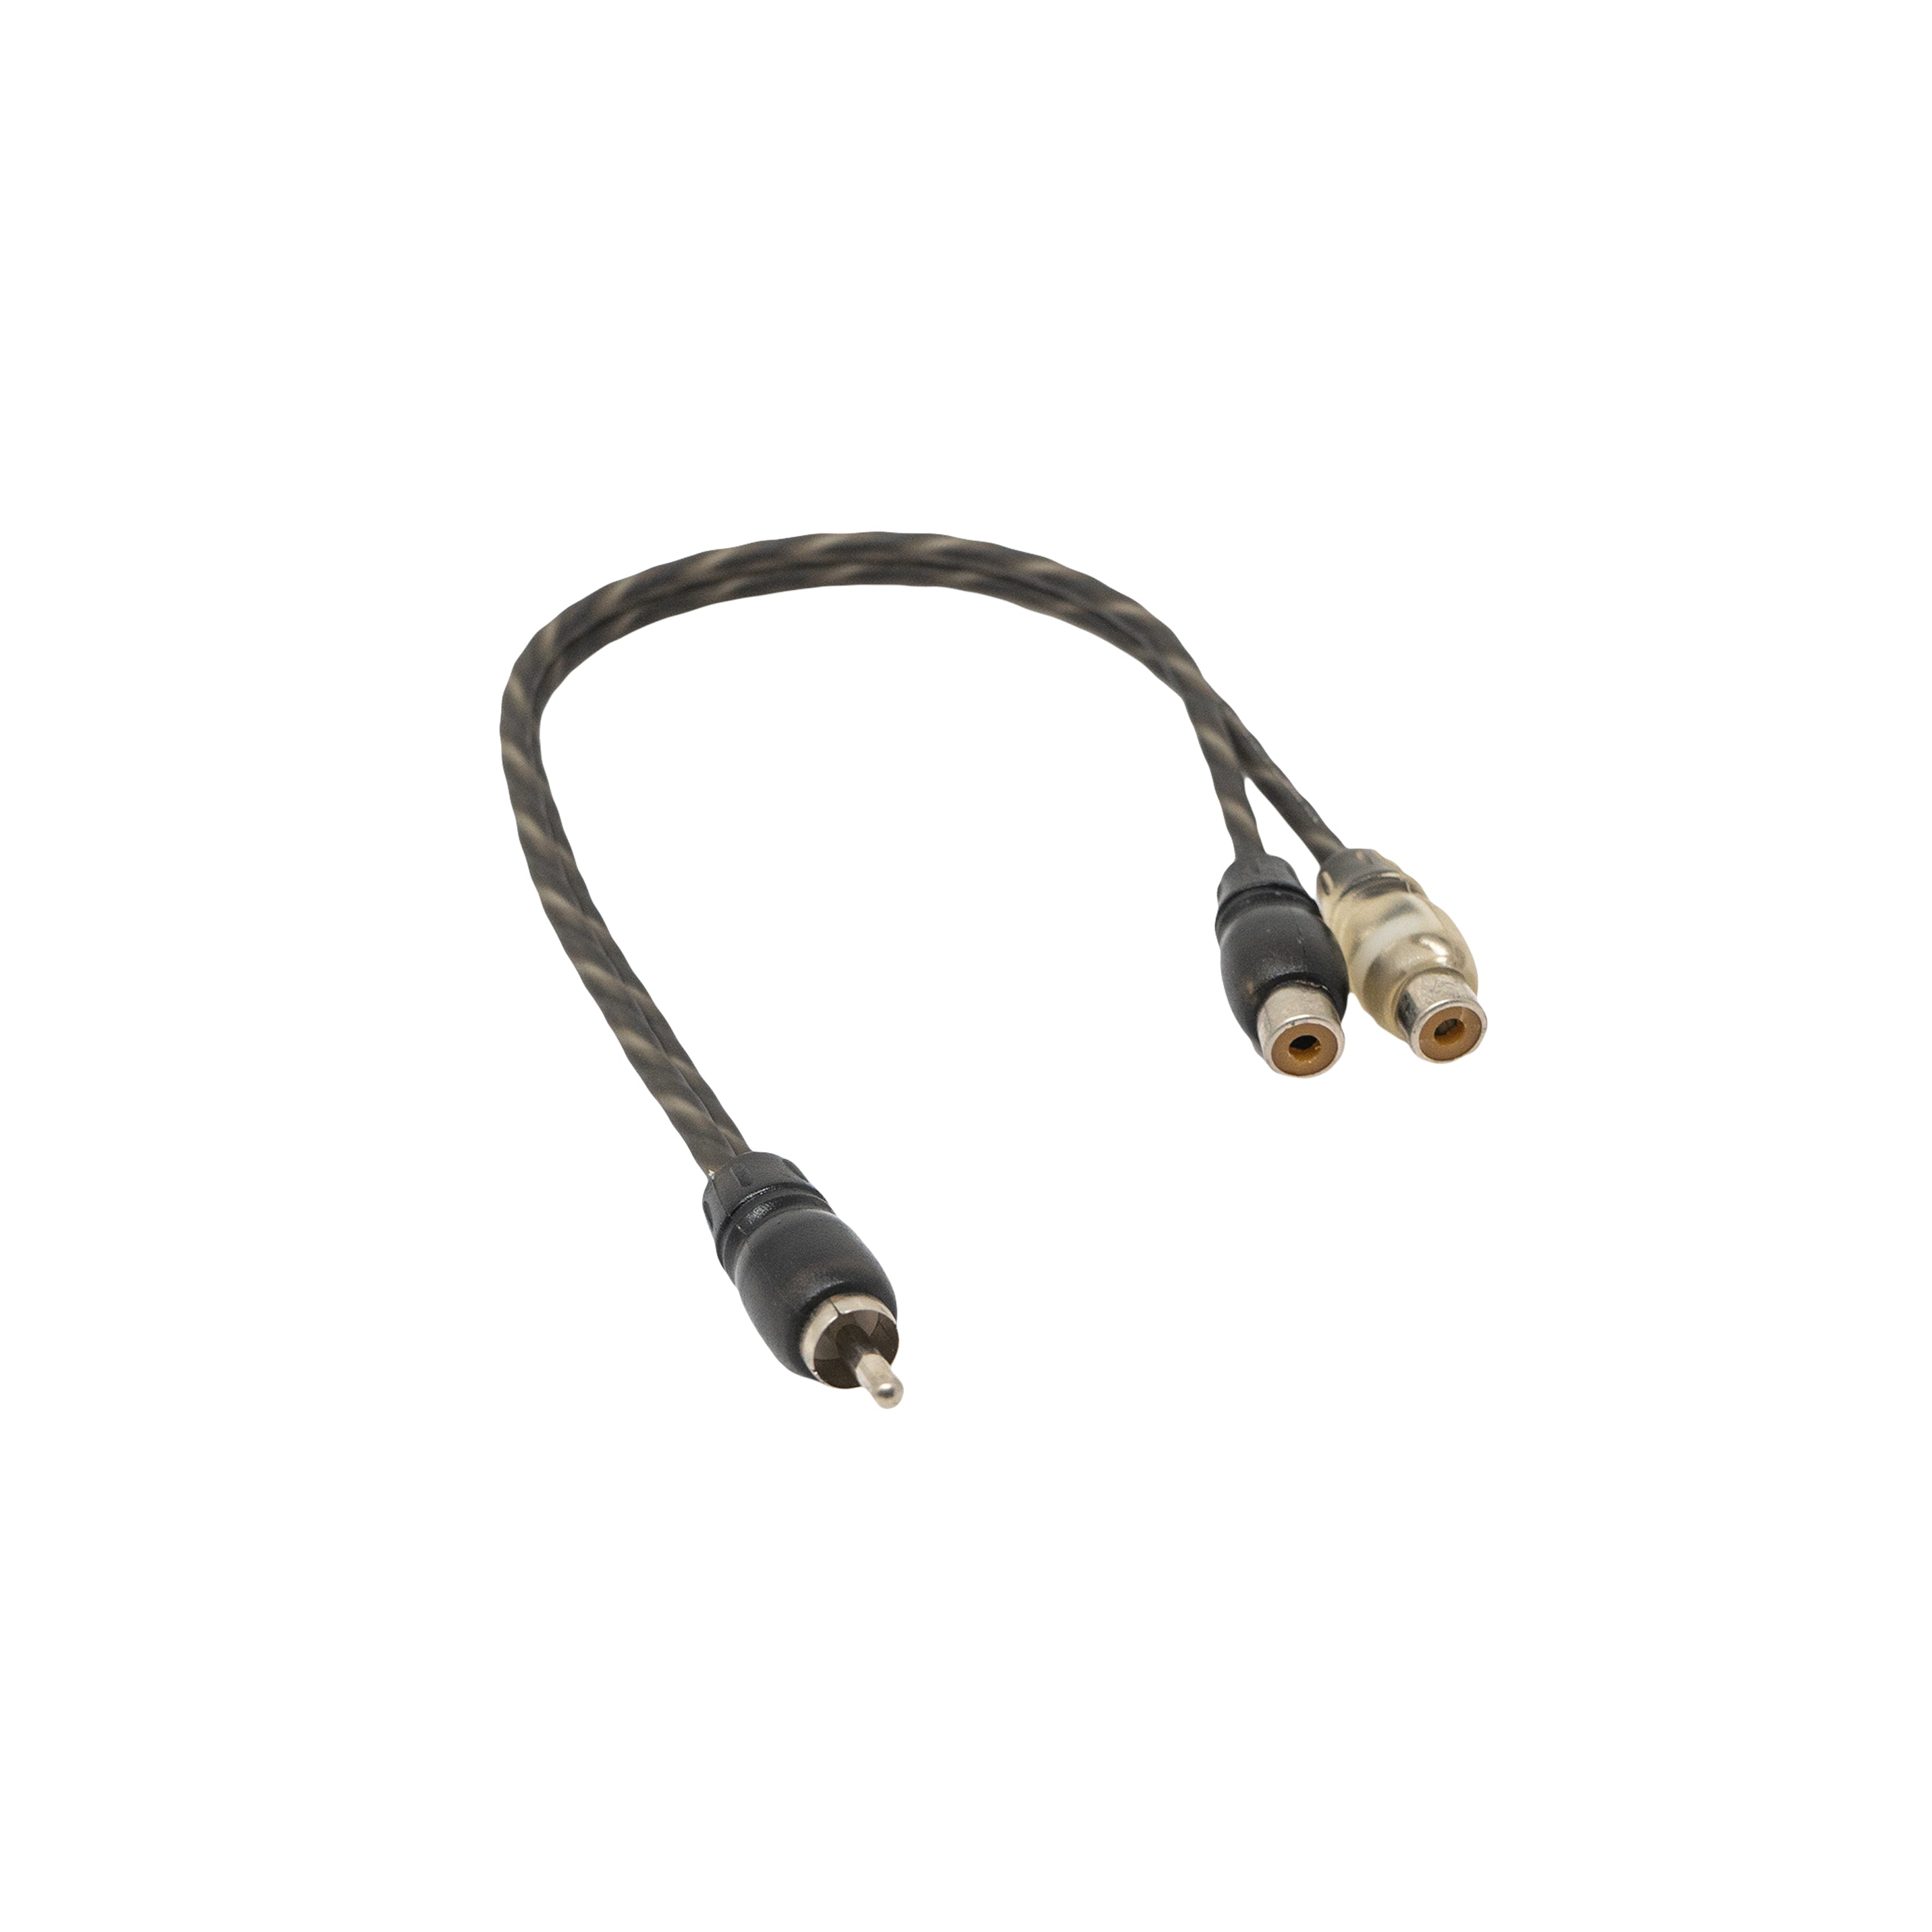 SoundBox LCY-1M, Twisted Pair RCA Y-Splitter, 1 Male - 2 Female - (Polybag Packaging)